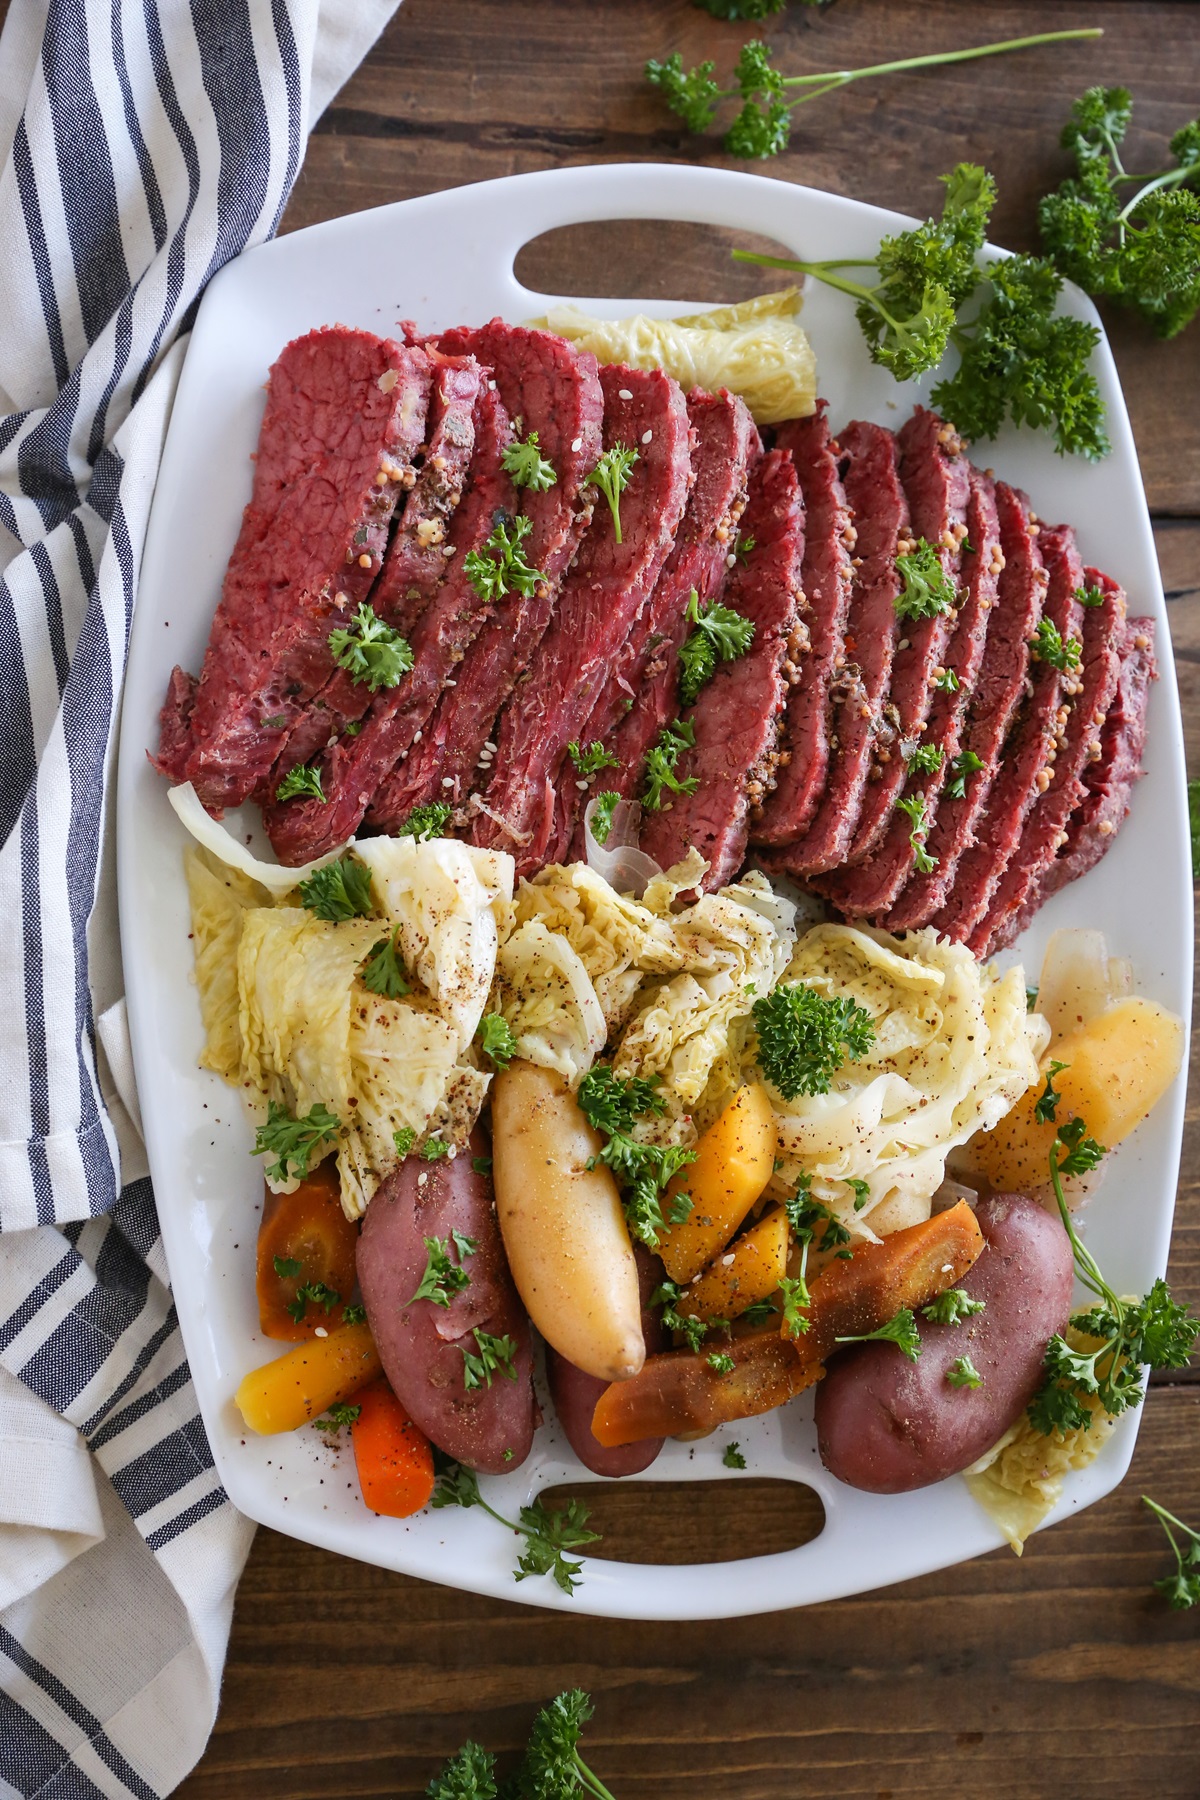 Platter of cooked corned beef, cabbage, potatoes, and carrots. Sliced up and ready to serve.